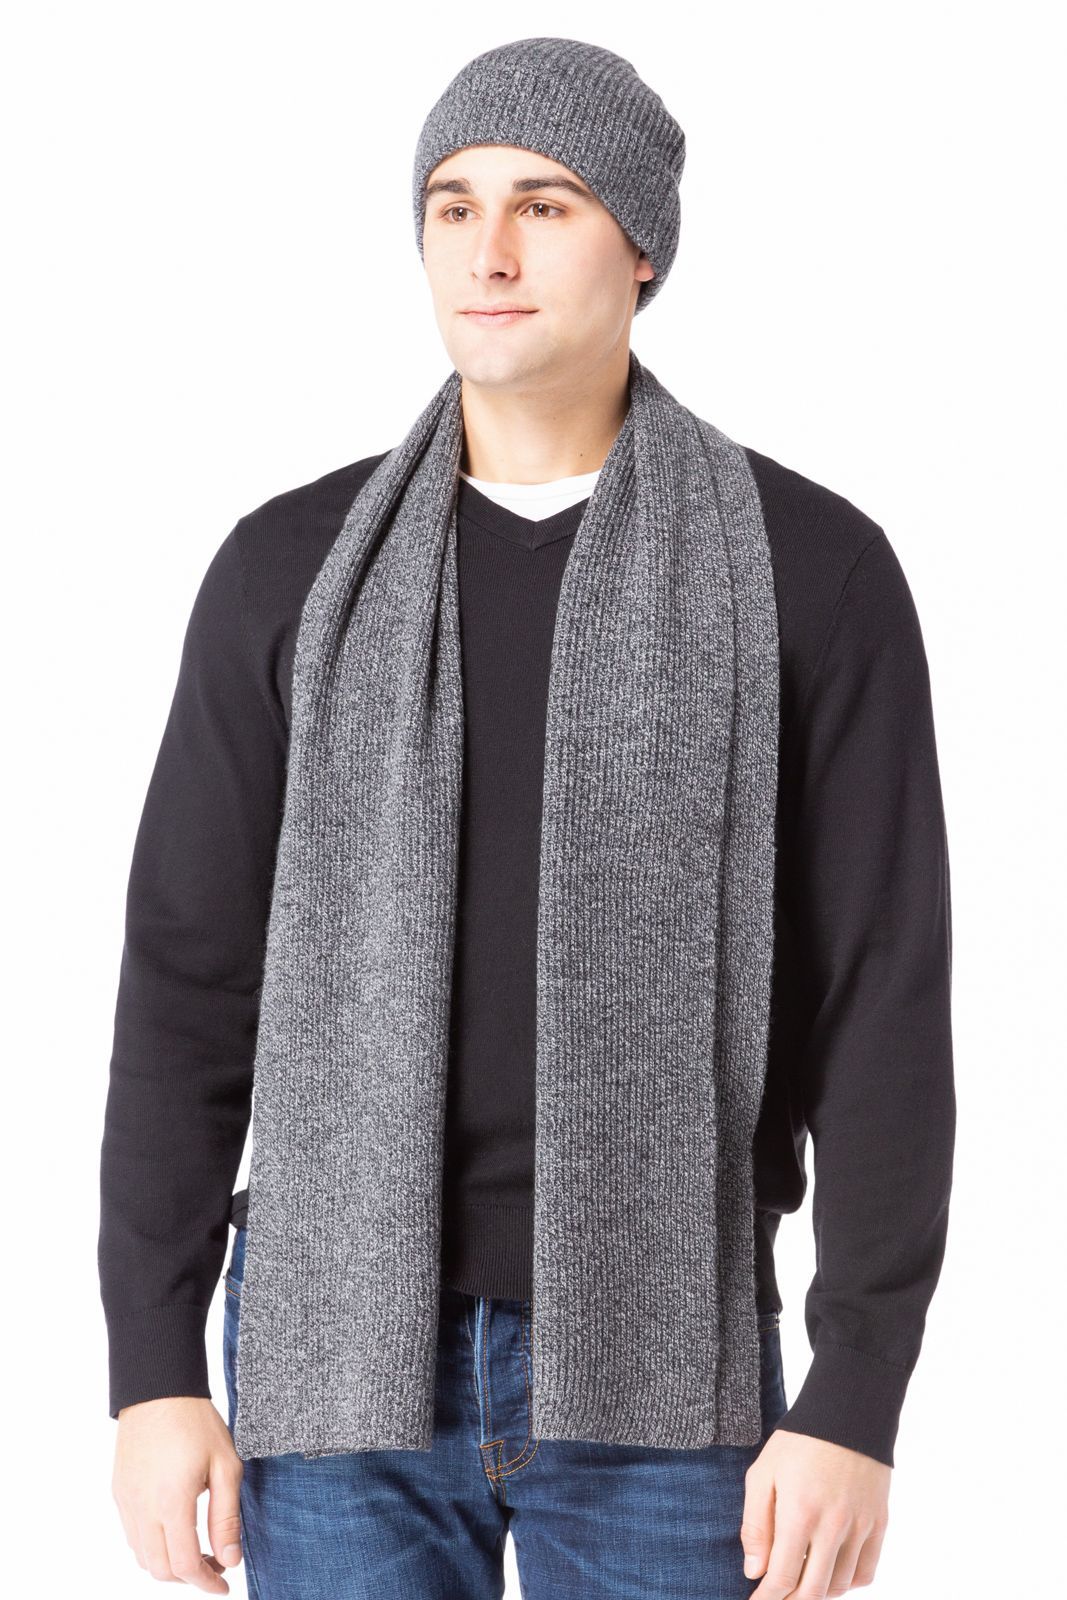 Fishers Finery Men's Classic Cashmere Scarf